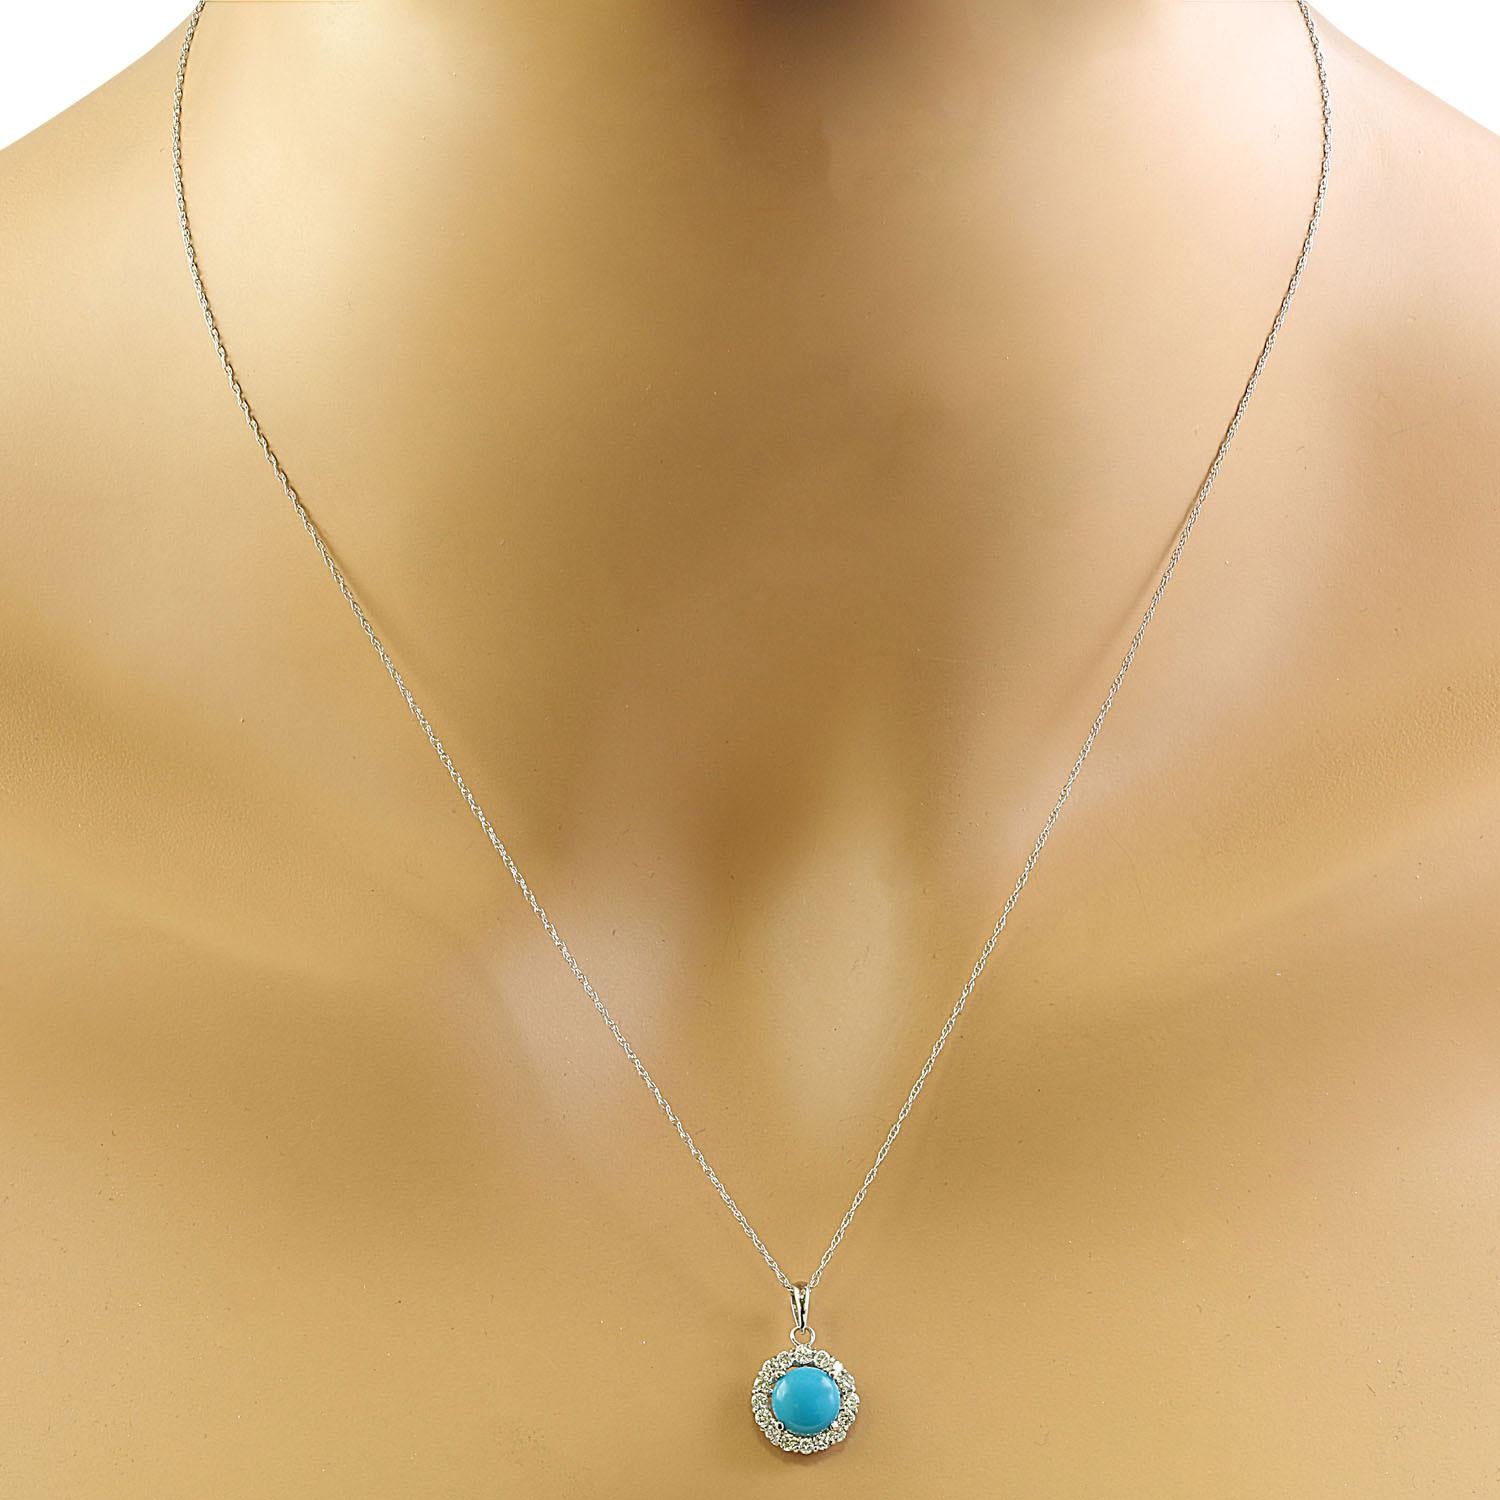 Exquisite Natural Turquoise Diamond Necklace In 14 Karat White Gold In New Condition For Sale In Manhattan Beach, CA